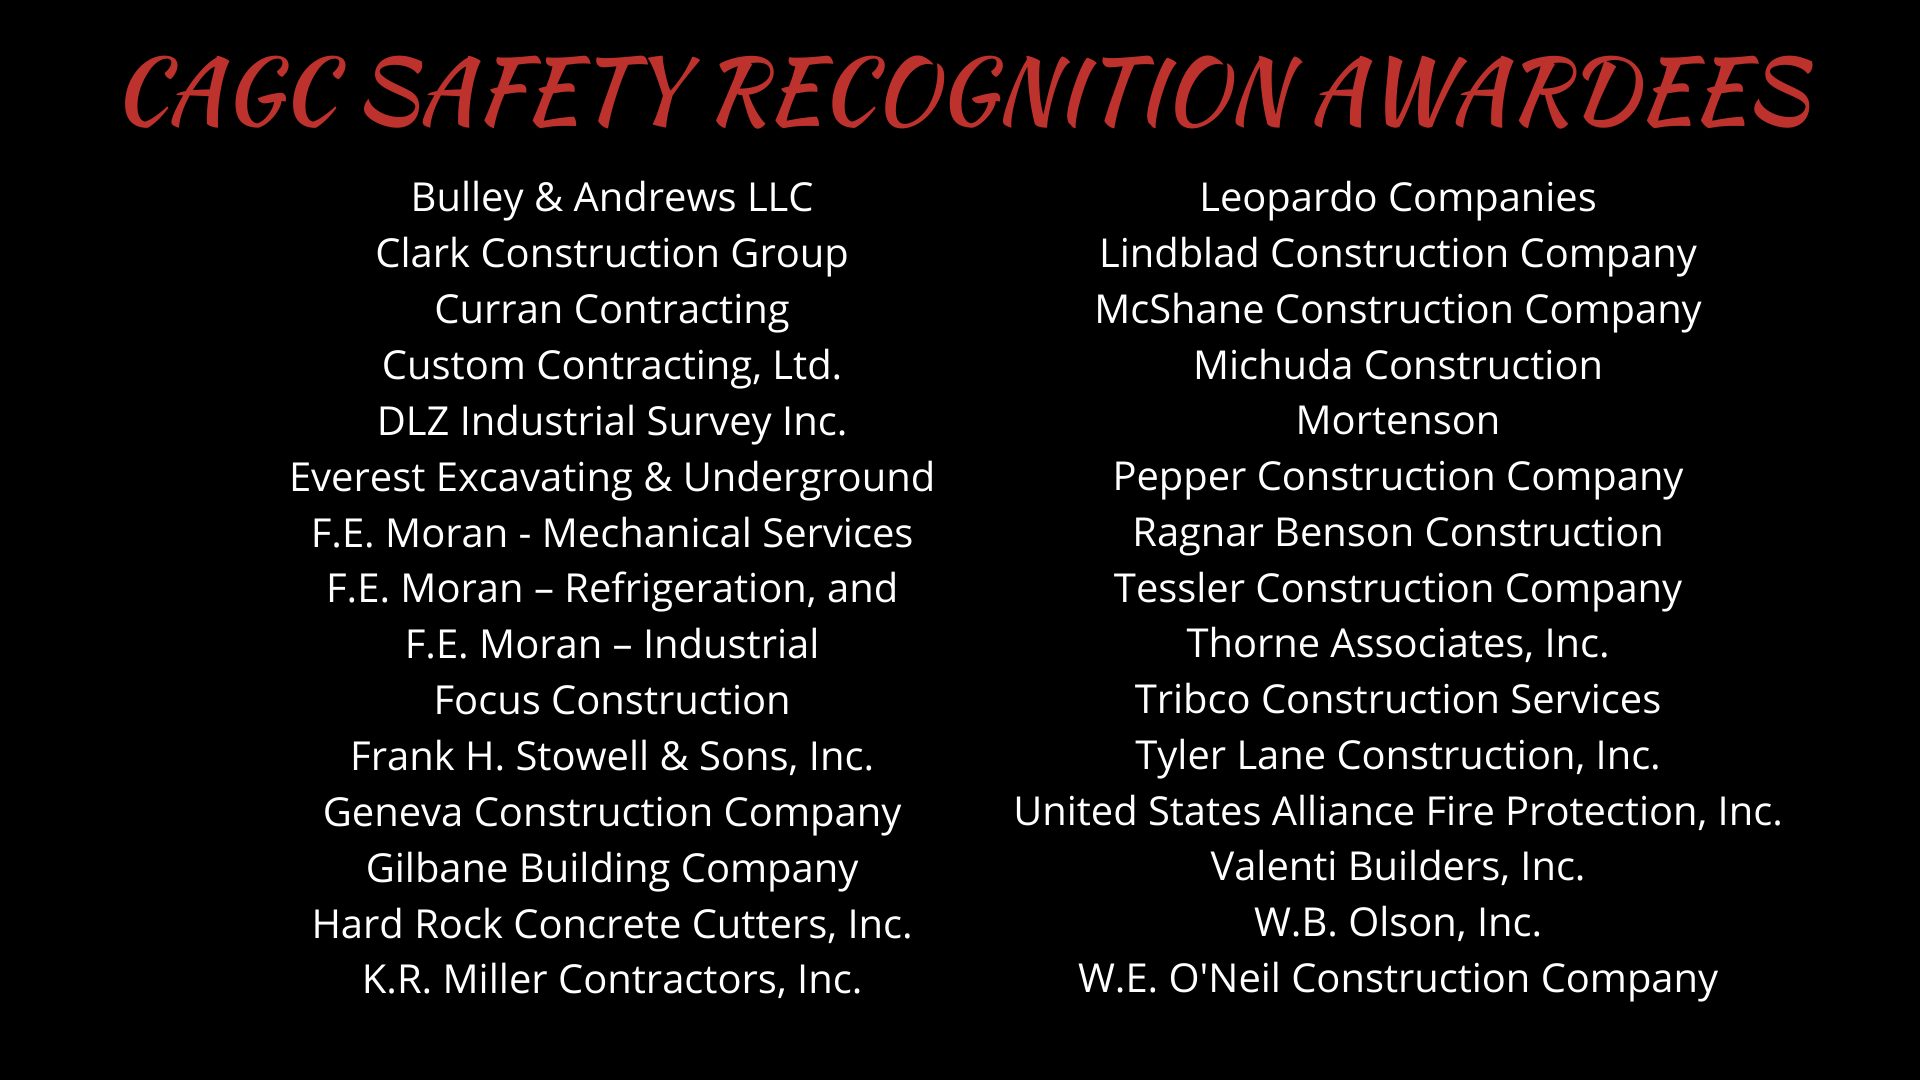 CAGC Safety Recognition Awardees